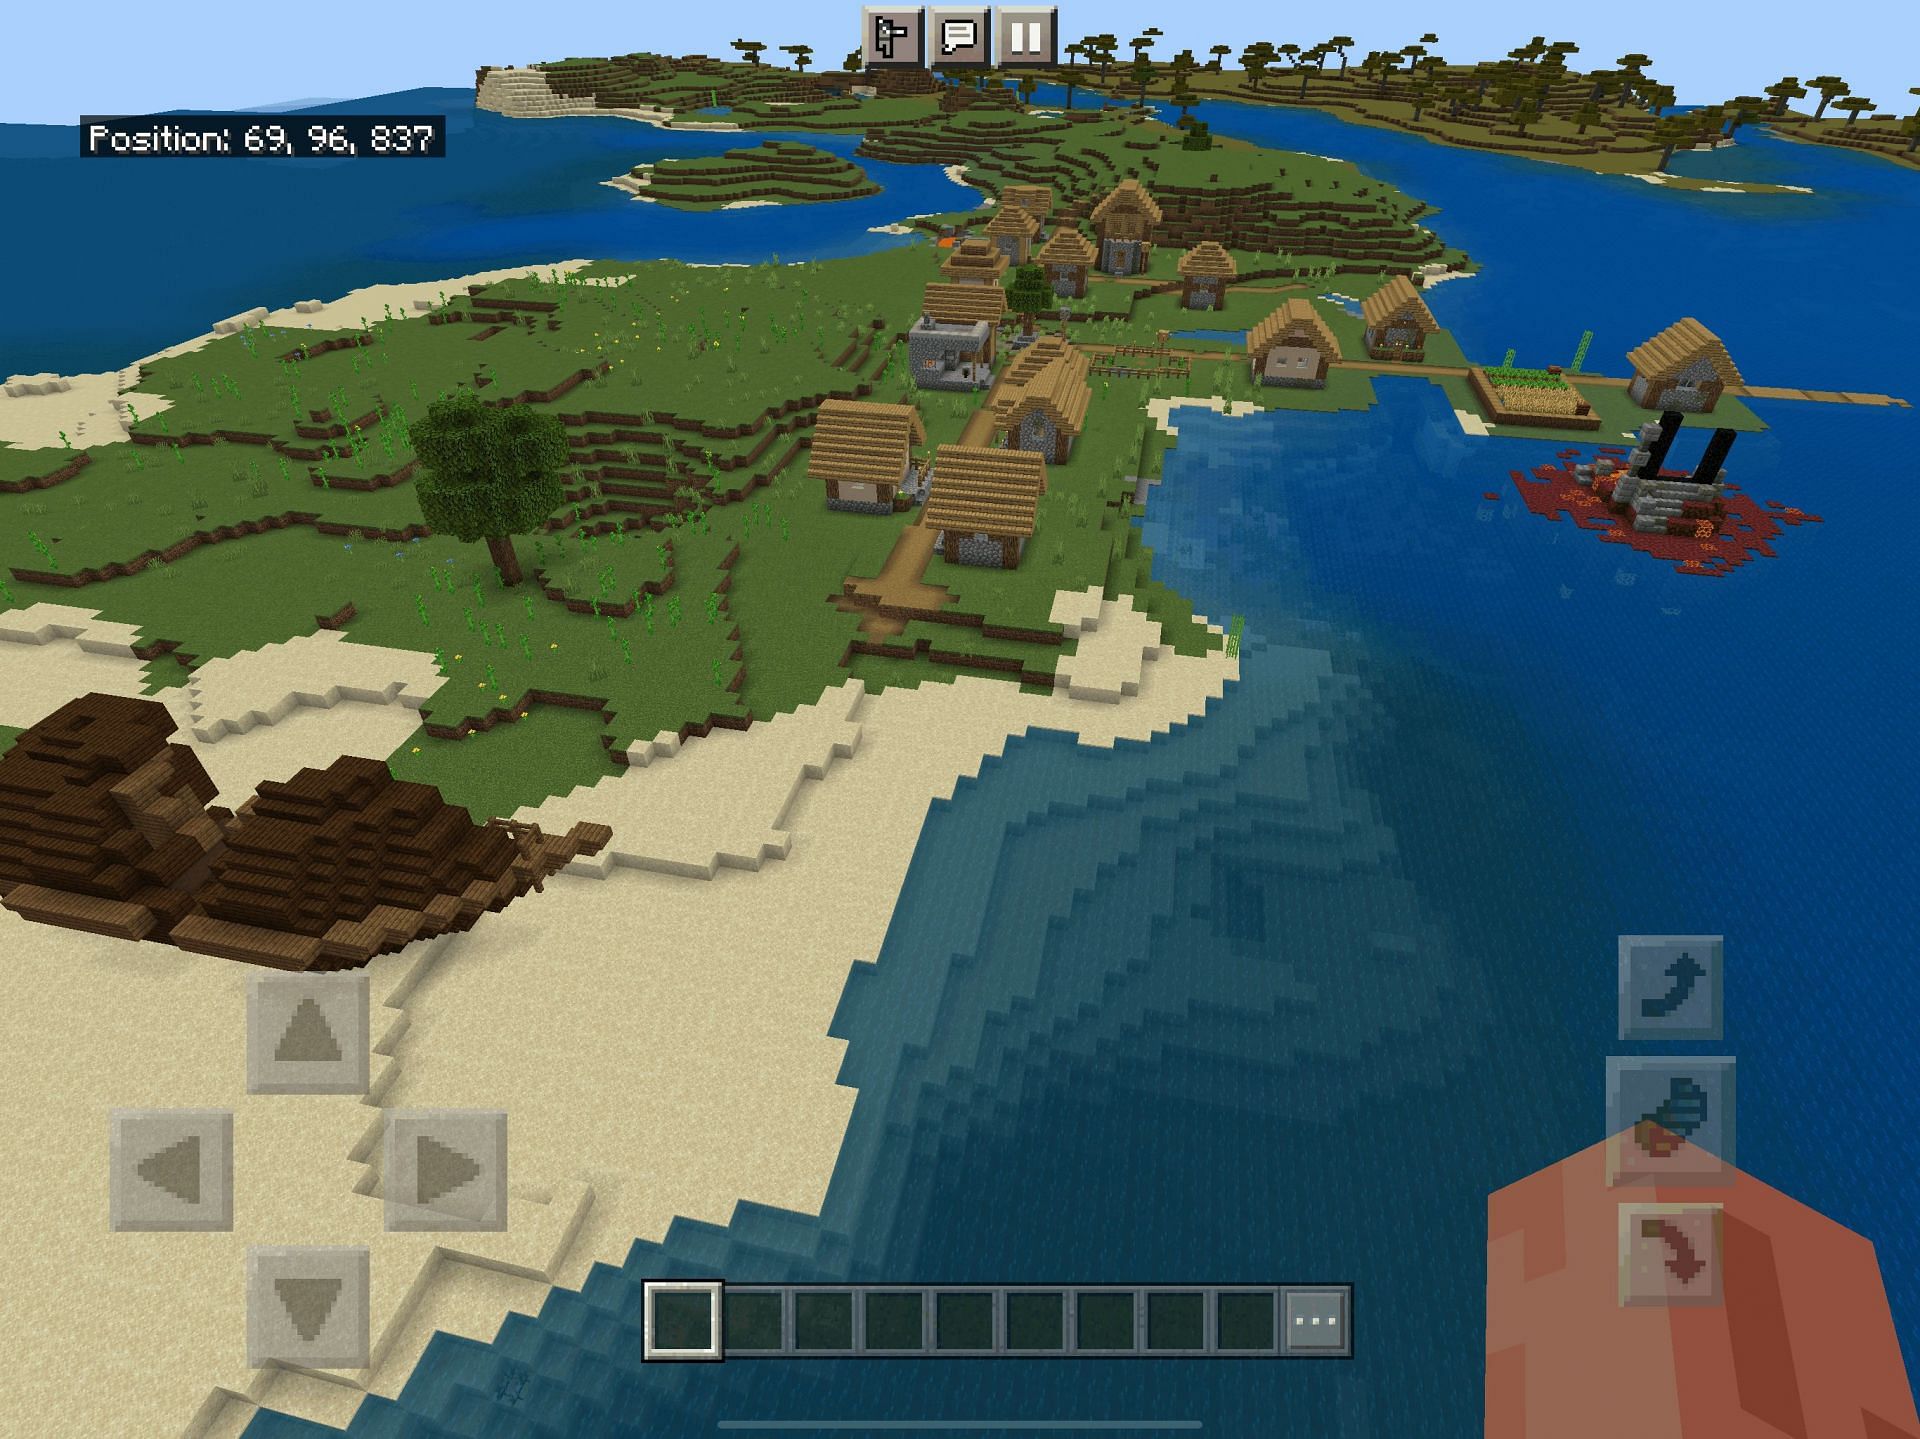 The village, shipwreck and ruined portal that players spawn near (Image via Mojang, Minecraft)